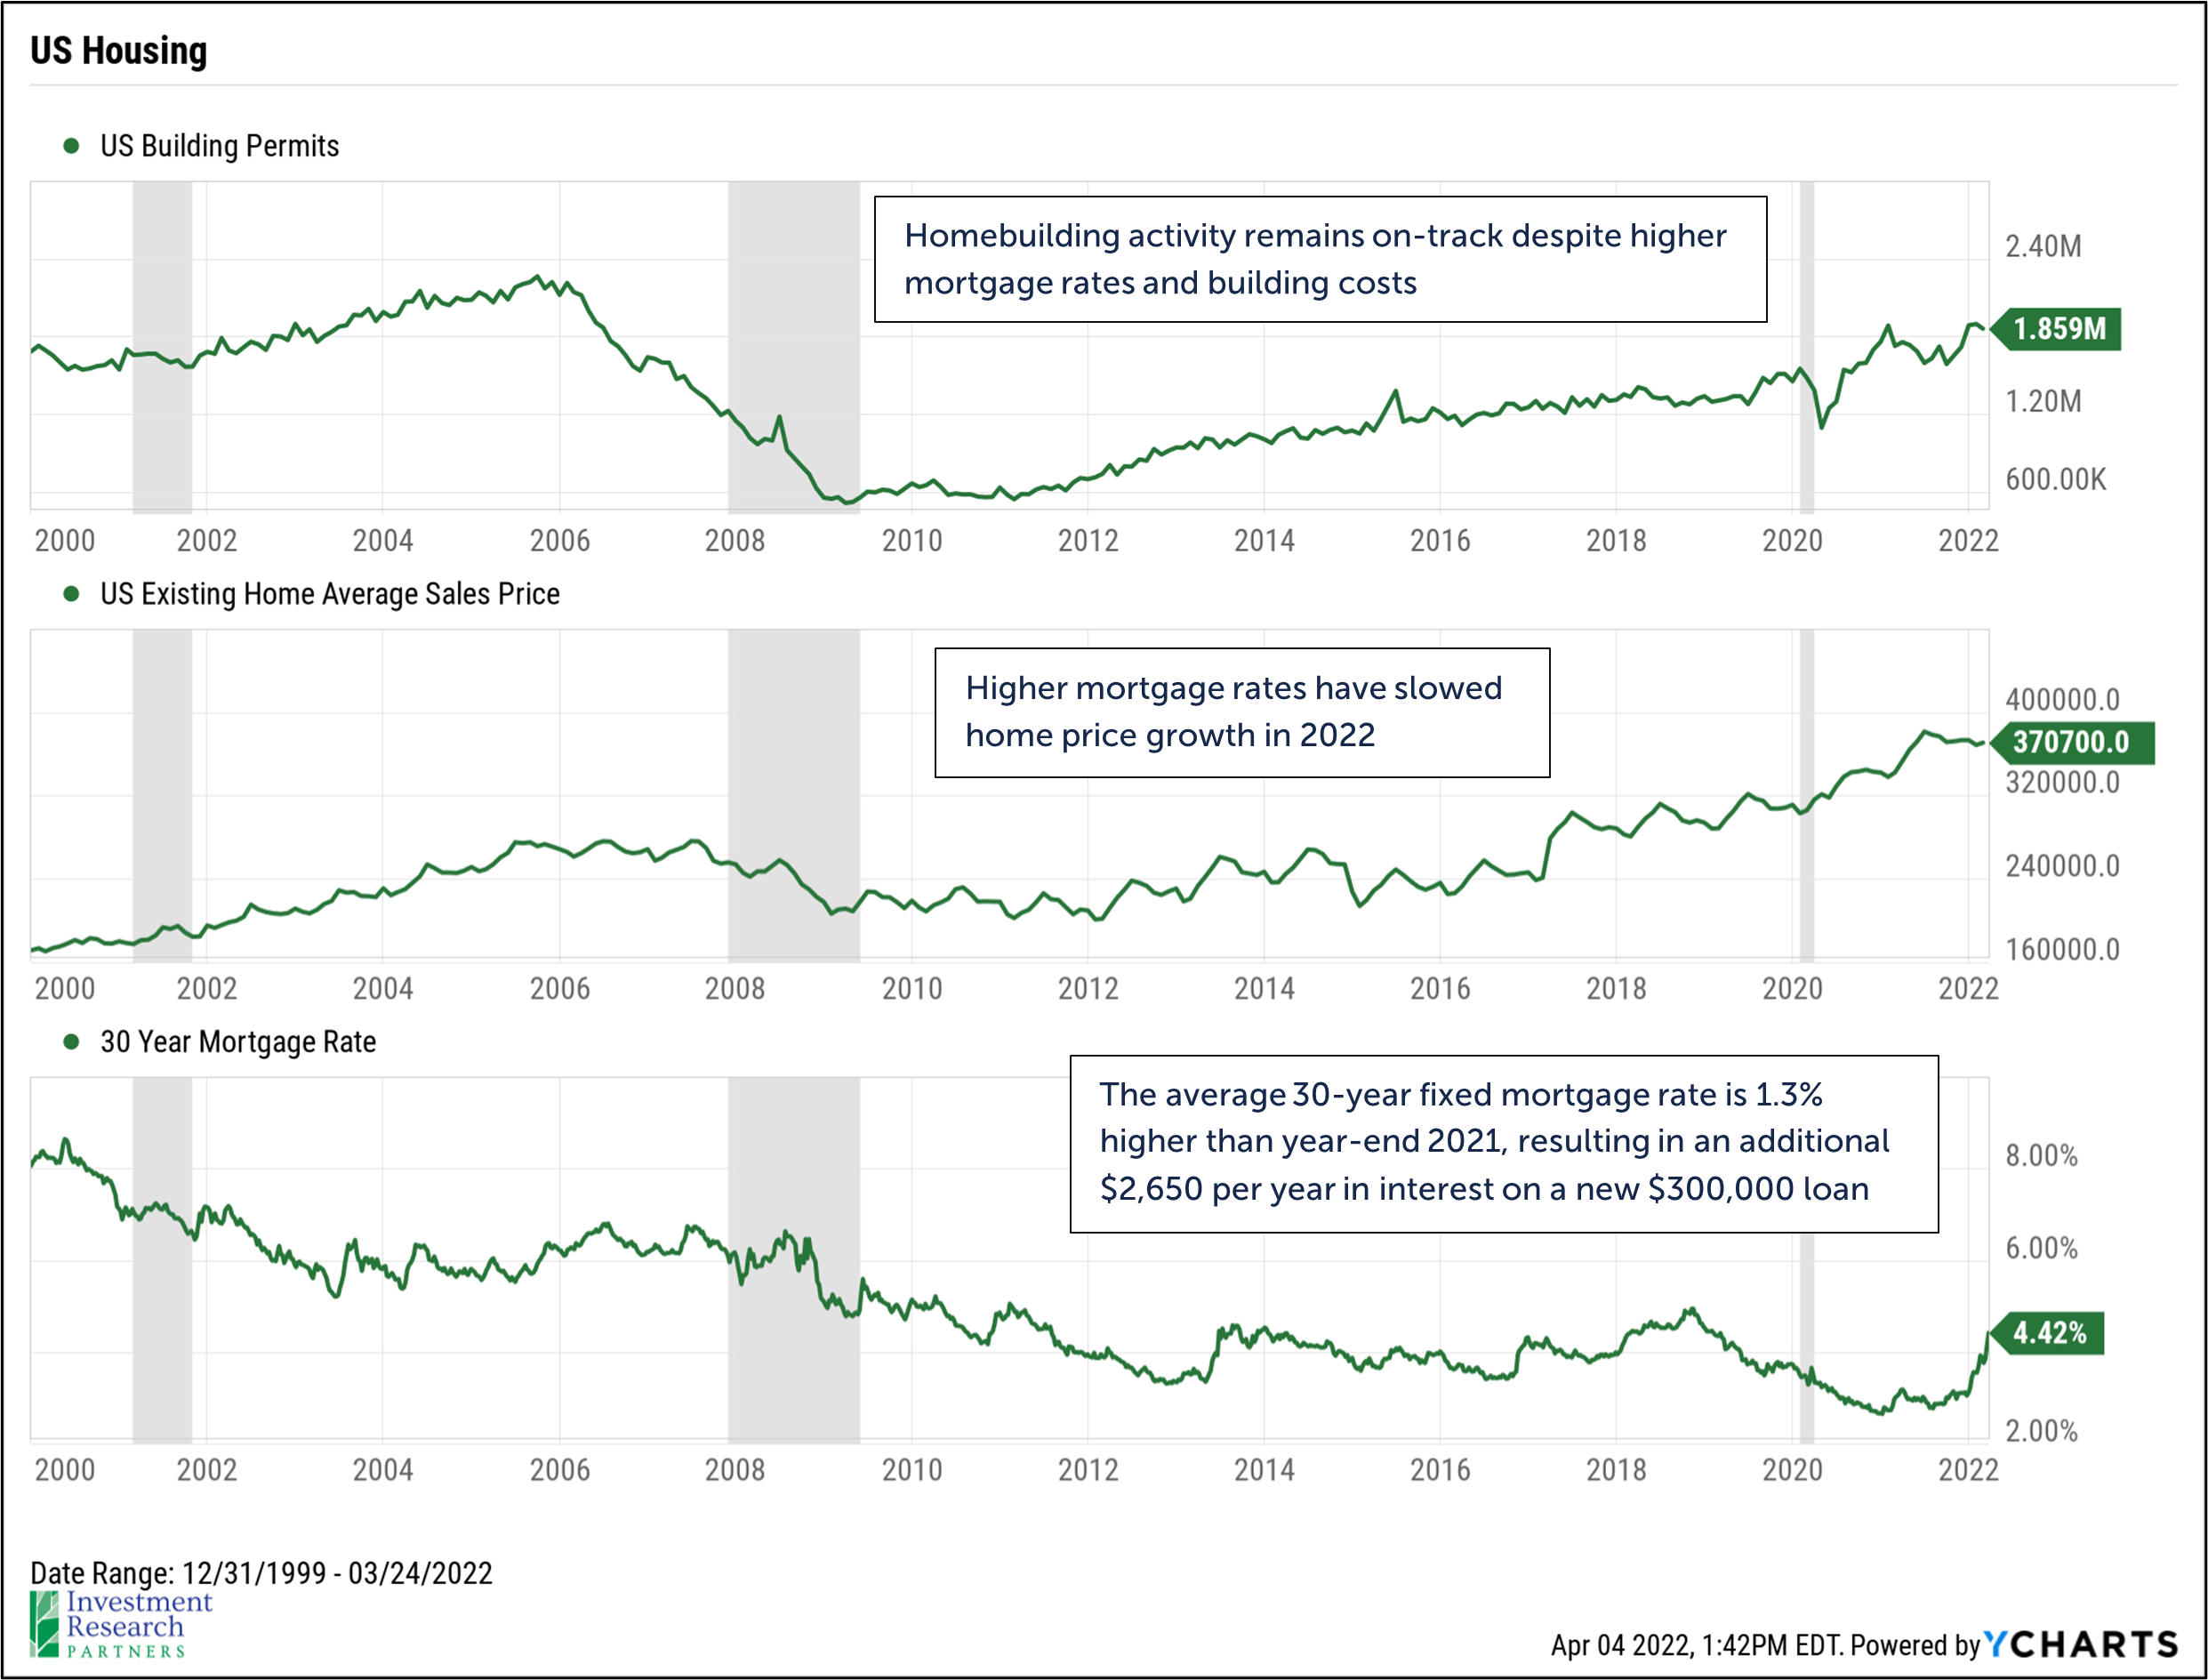 Line graphs depicting US Housing, including US Building Permits, US Existing Home Average Sales Price, and 30 Year Mortgage